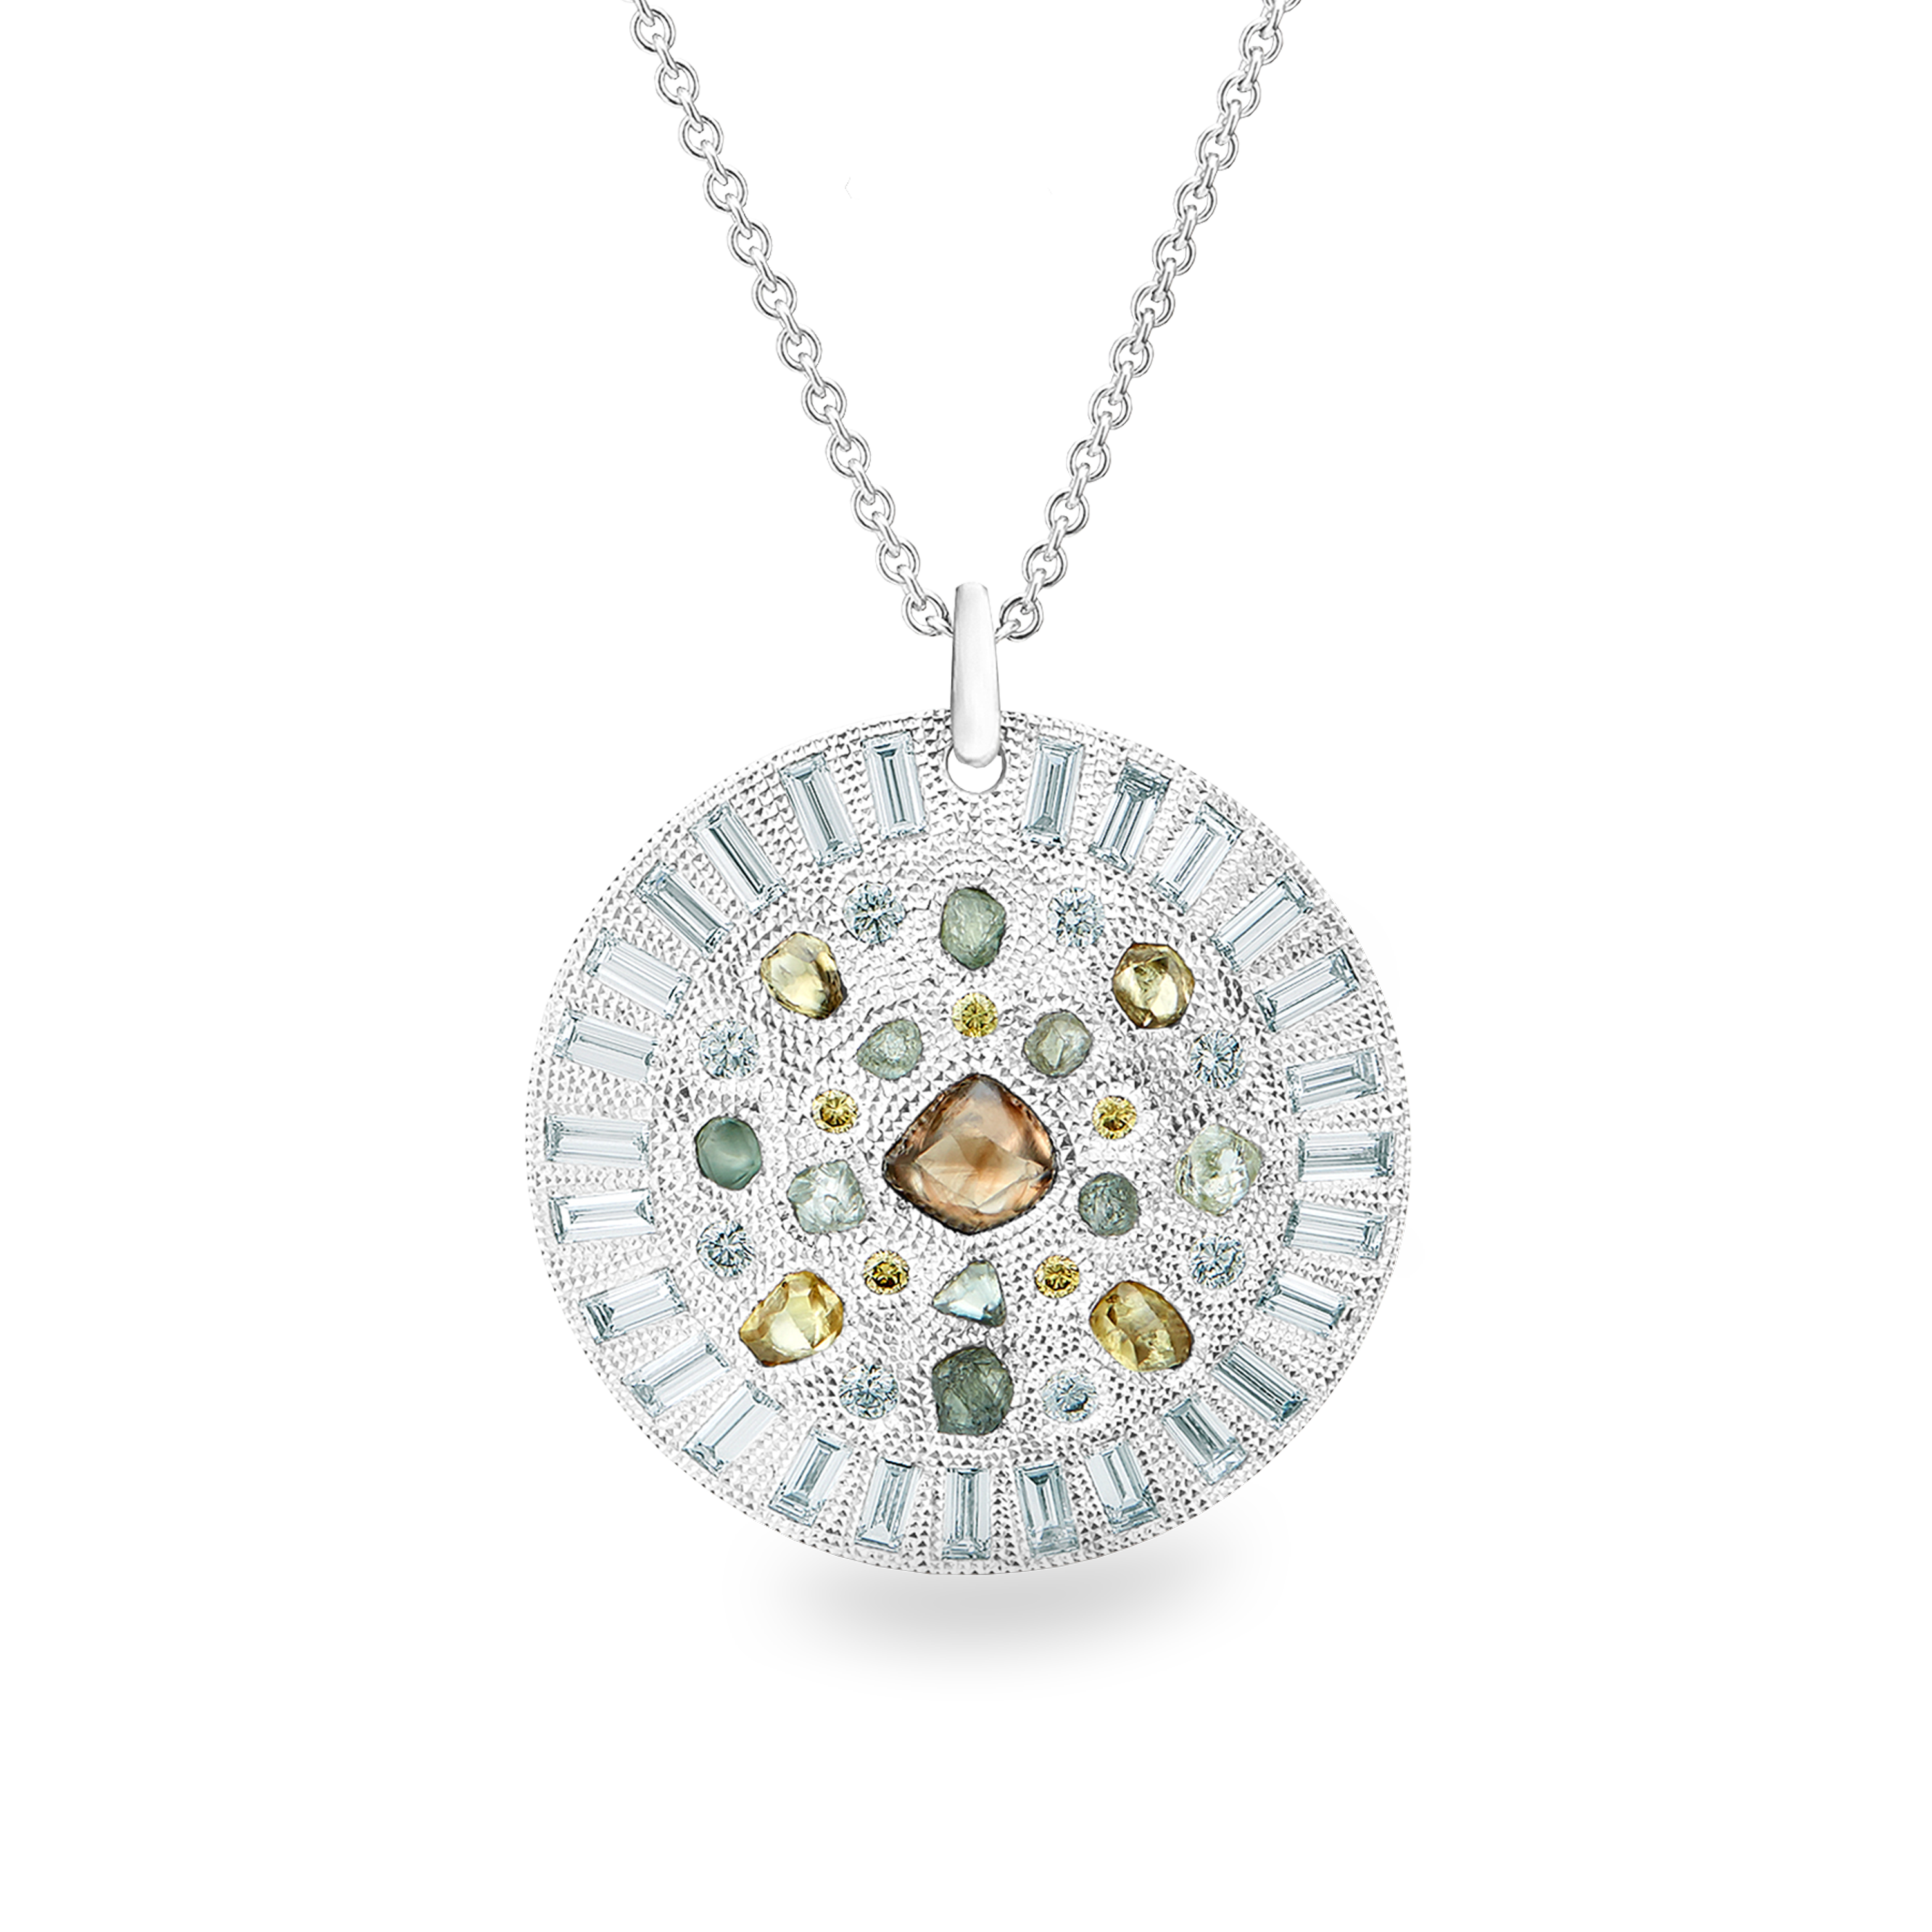 Talisman medal in white gold, image 1